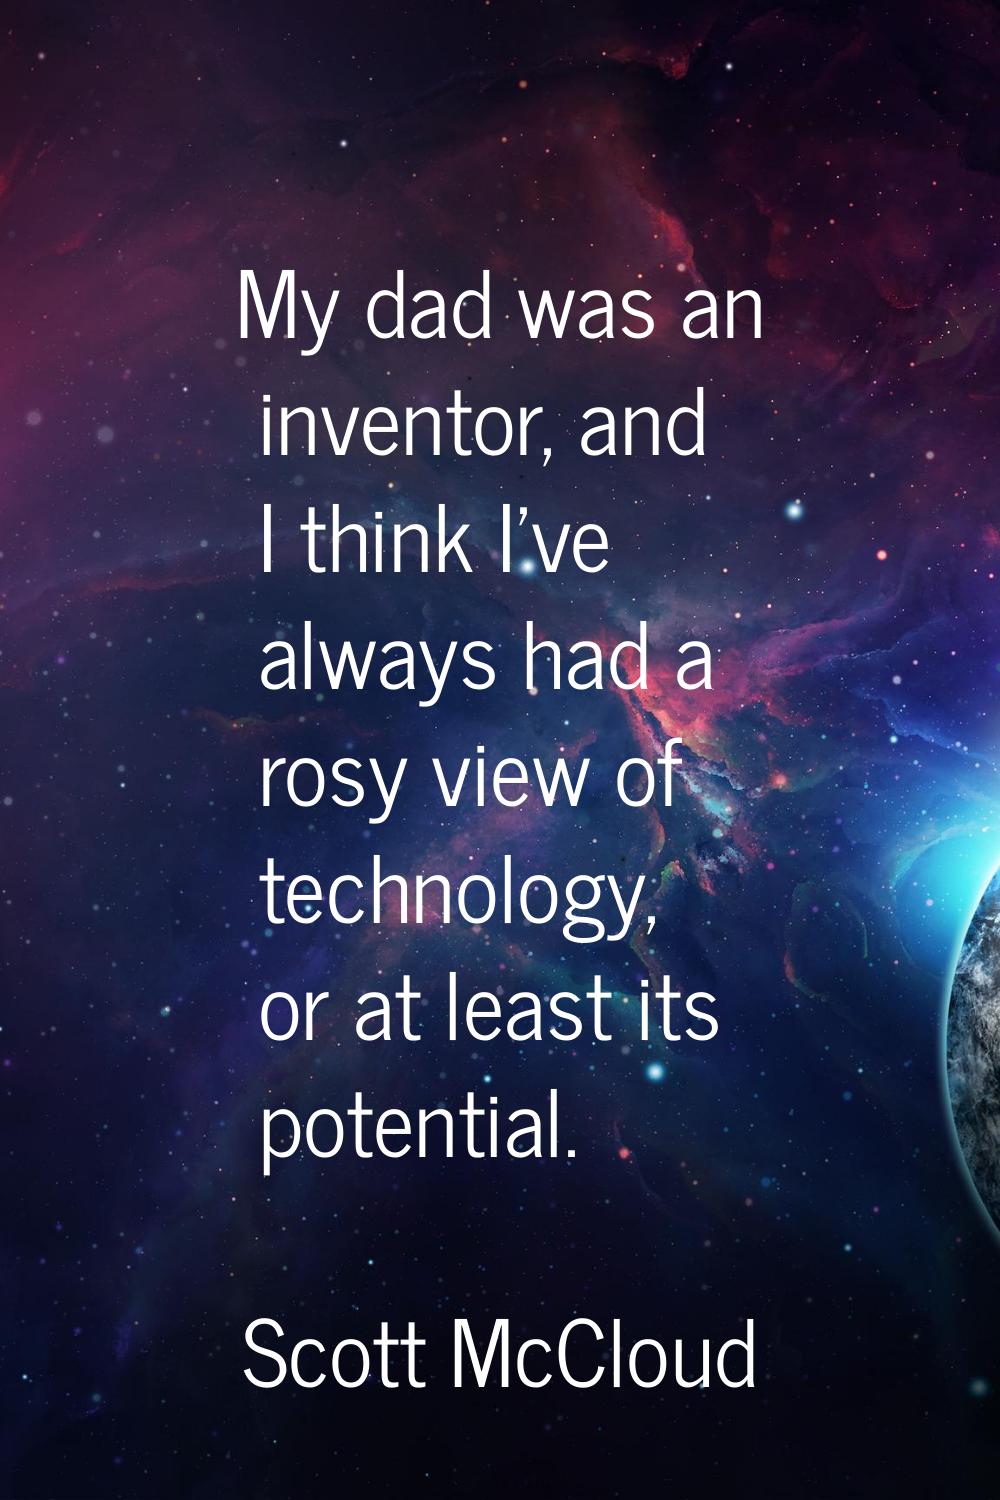 My dad was an inventor, and I think I've always had a rosy view of technology, or at least its pote